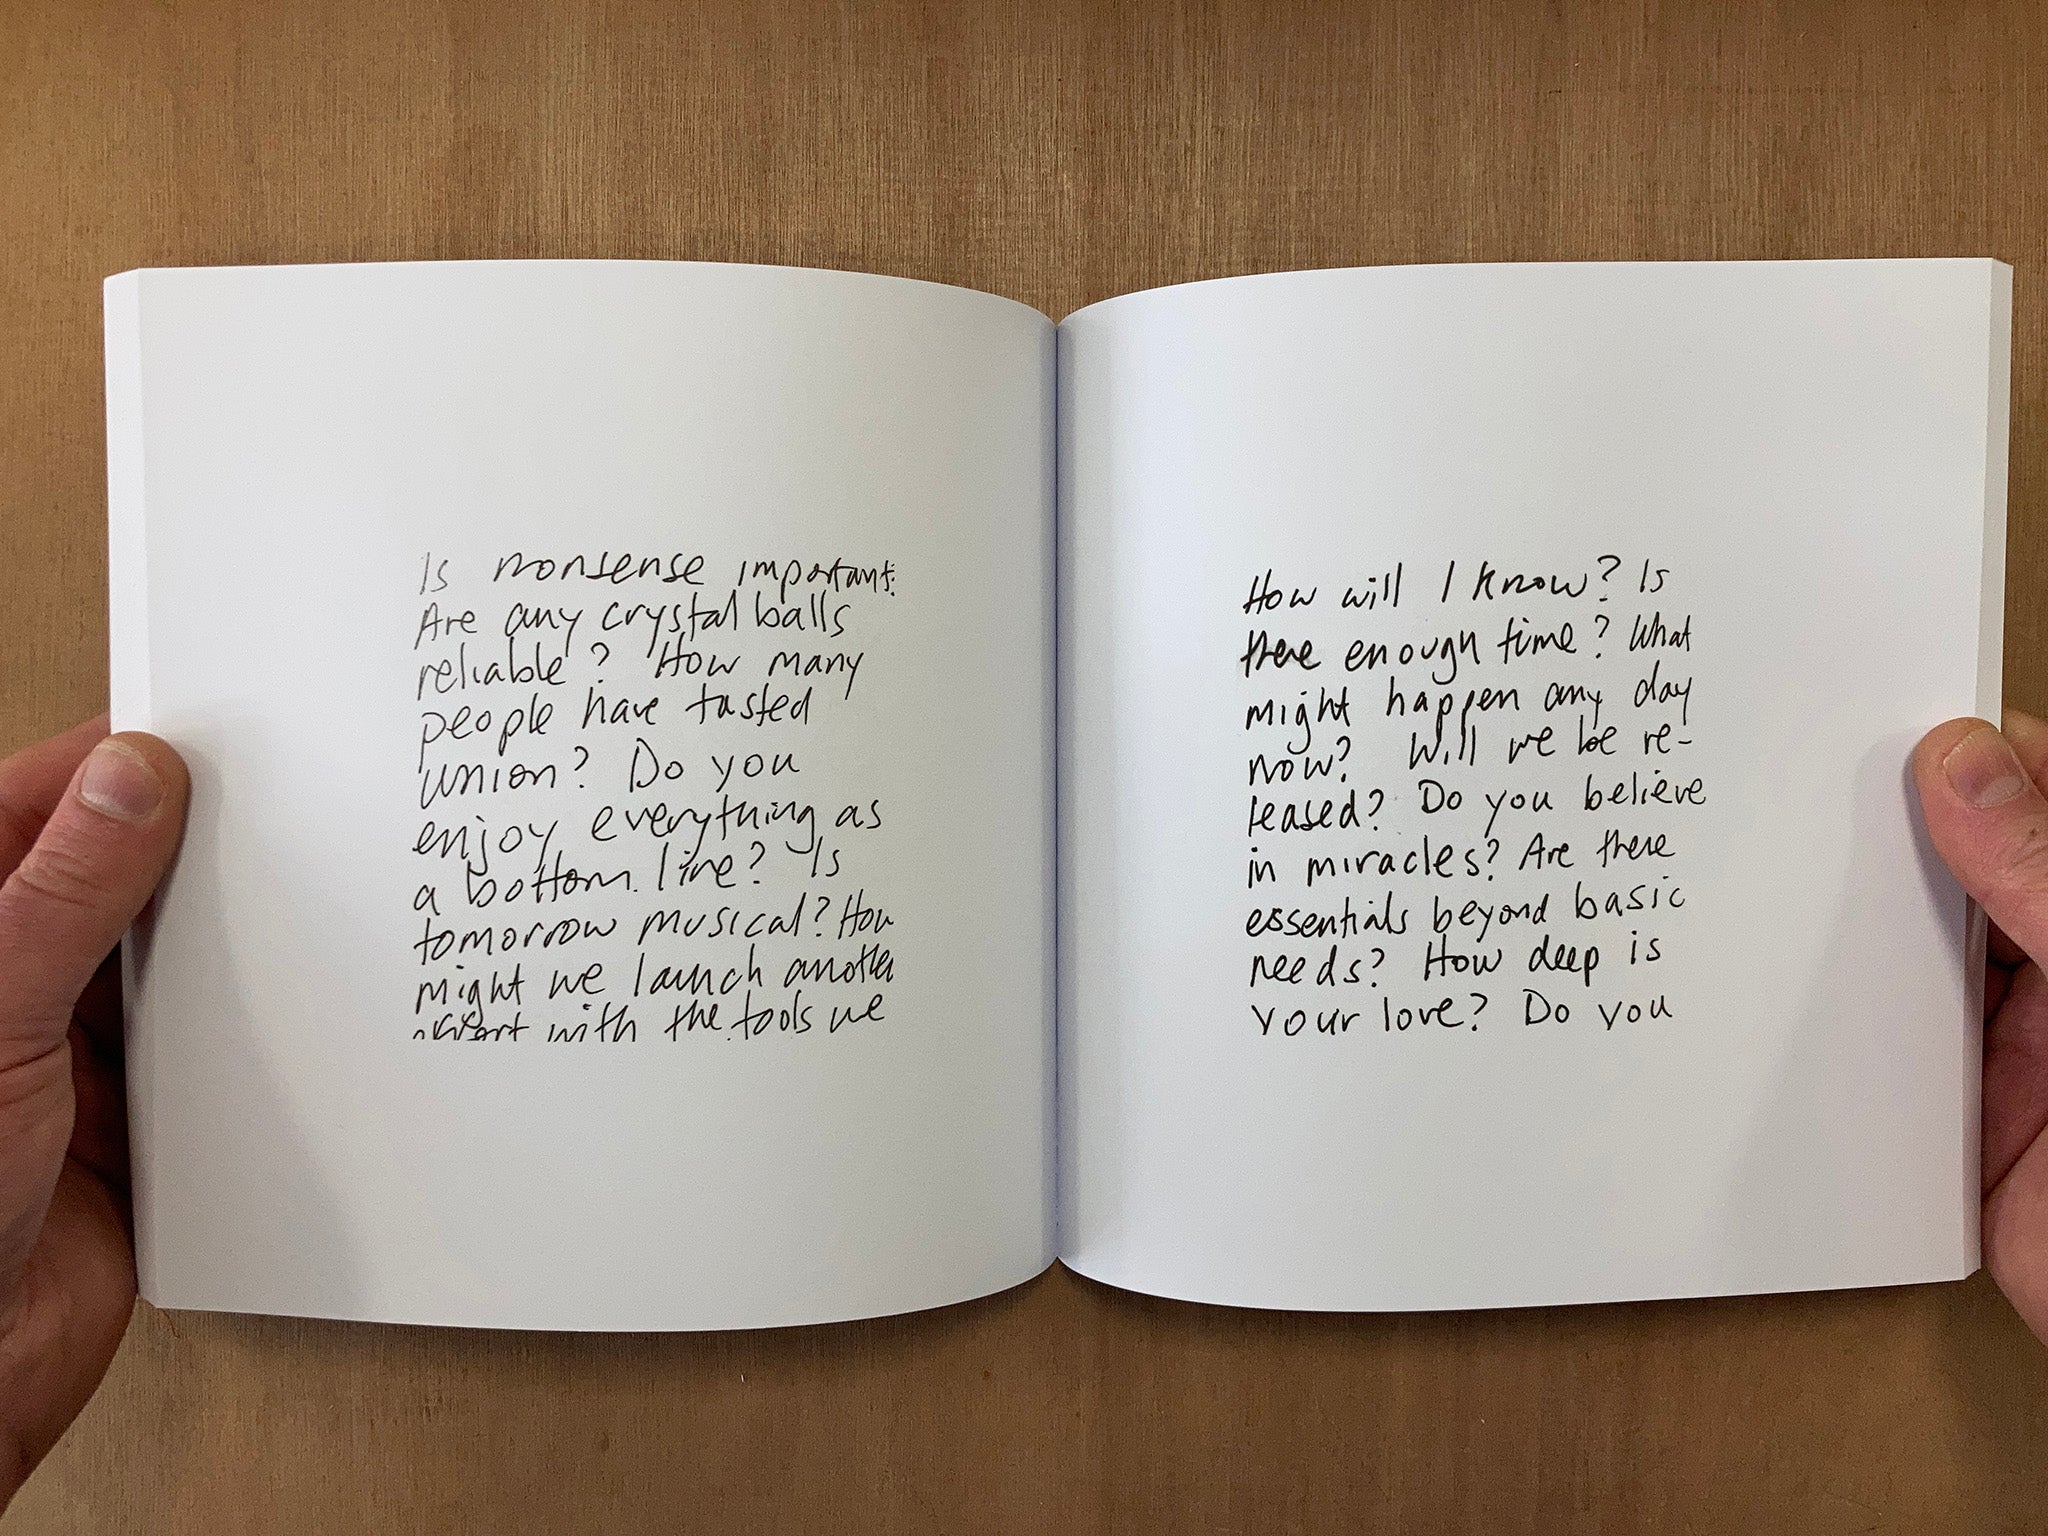 10,000 HAND-DRAWN QUESTIONS by Peter Jaeger